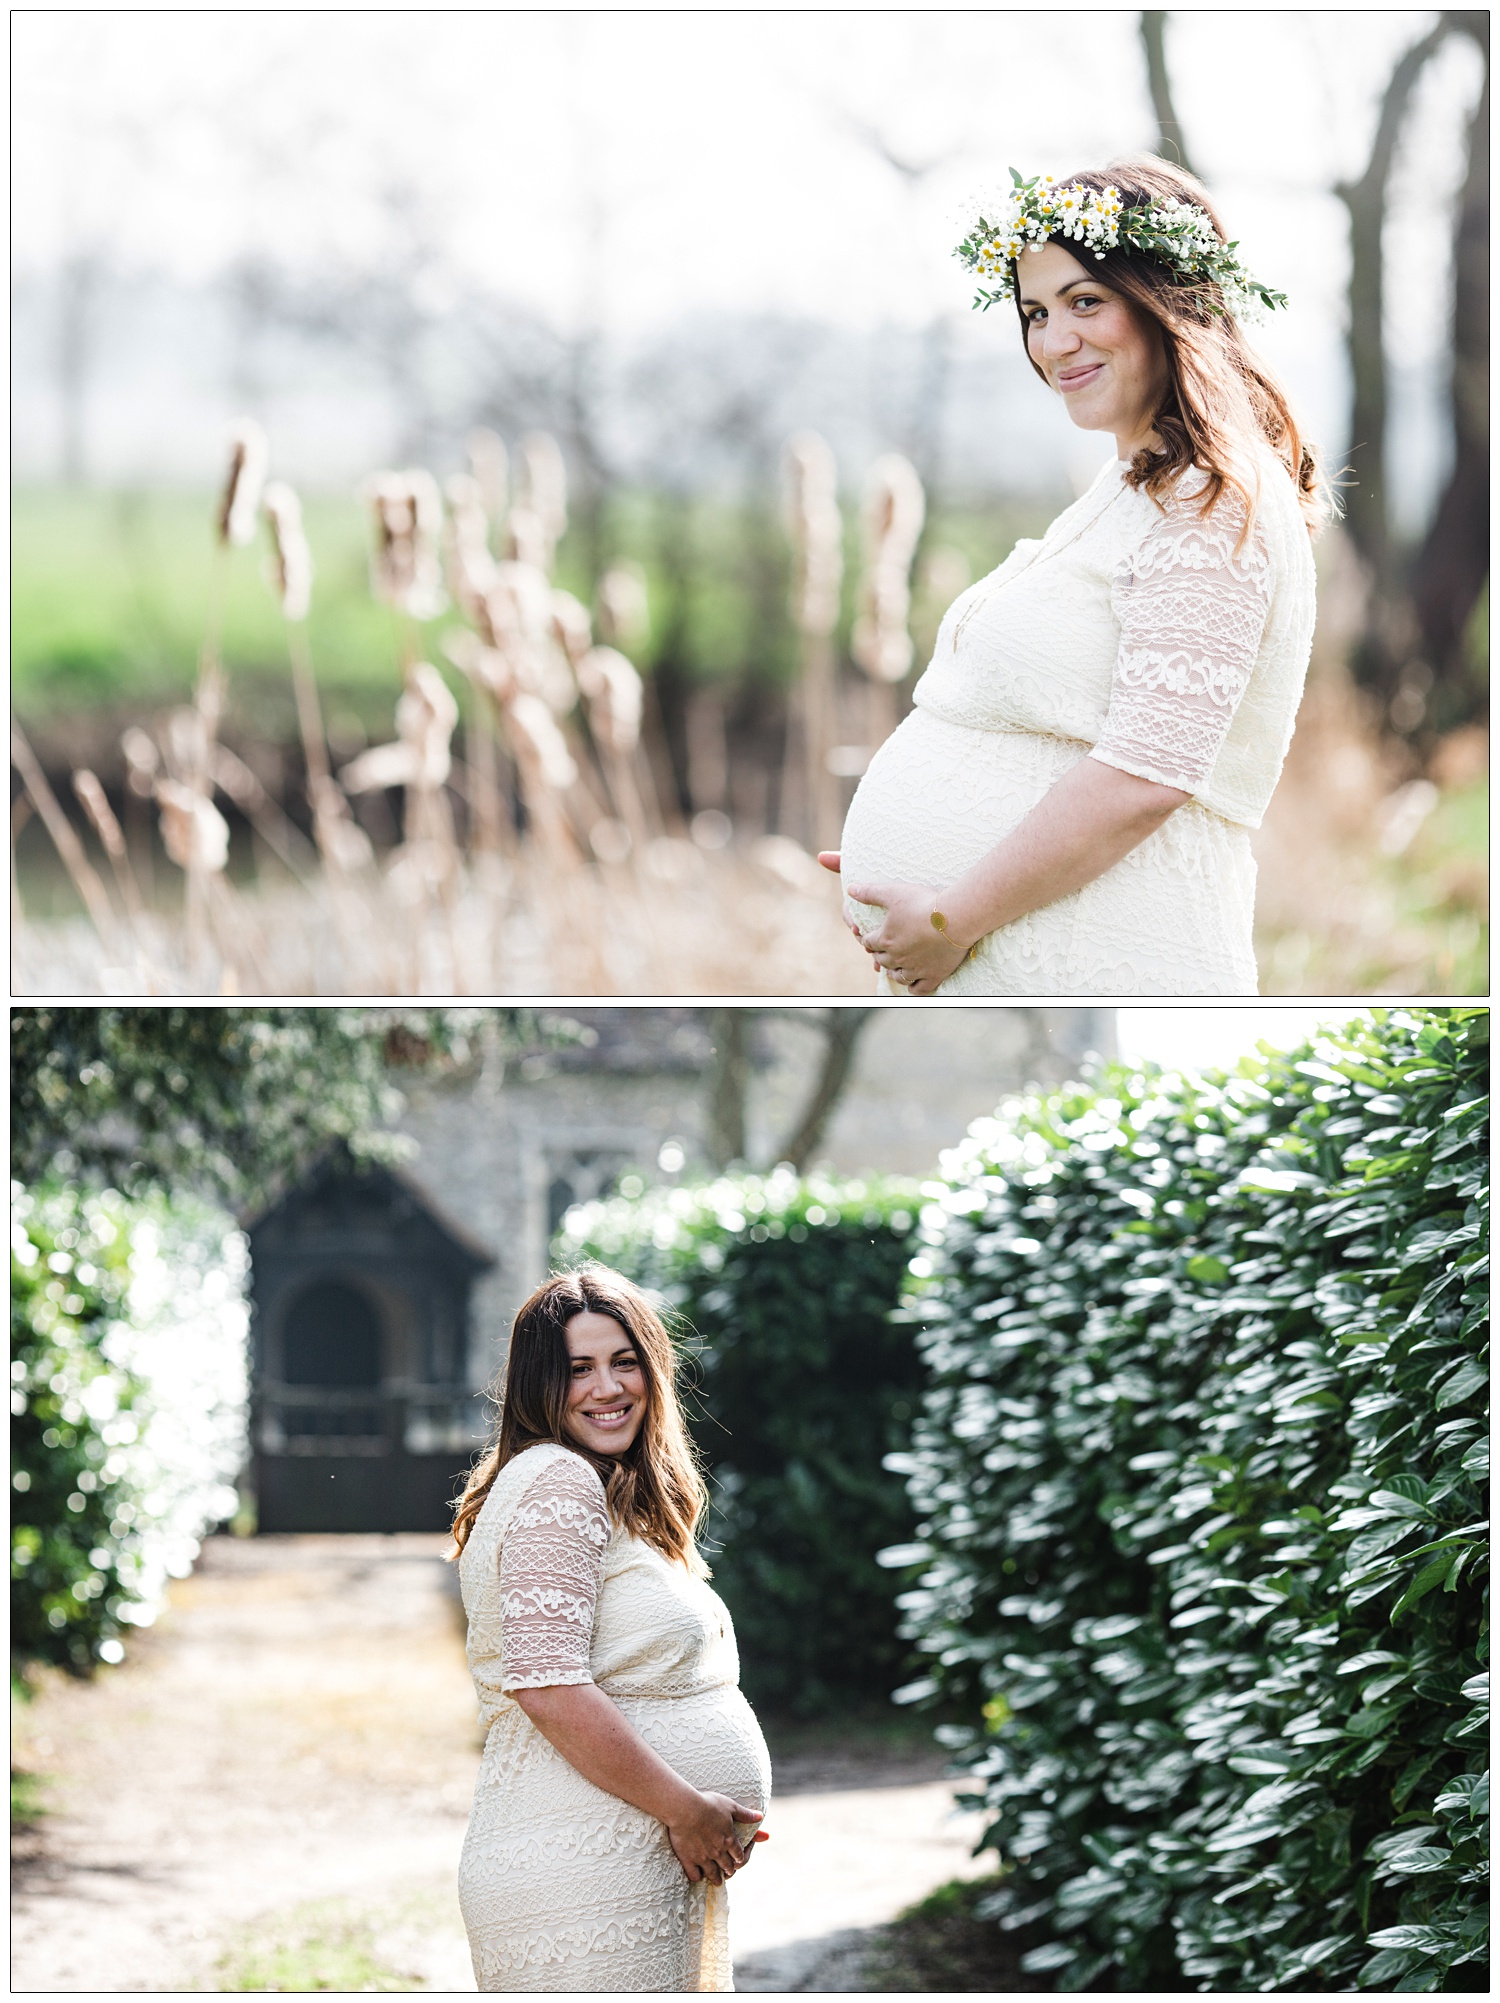 maternity photography pictures outside in hazy sunshine